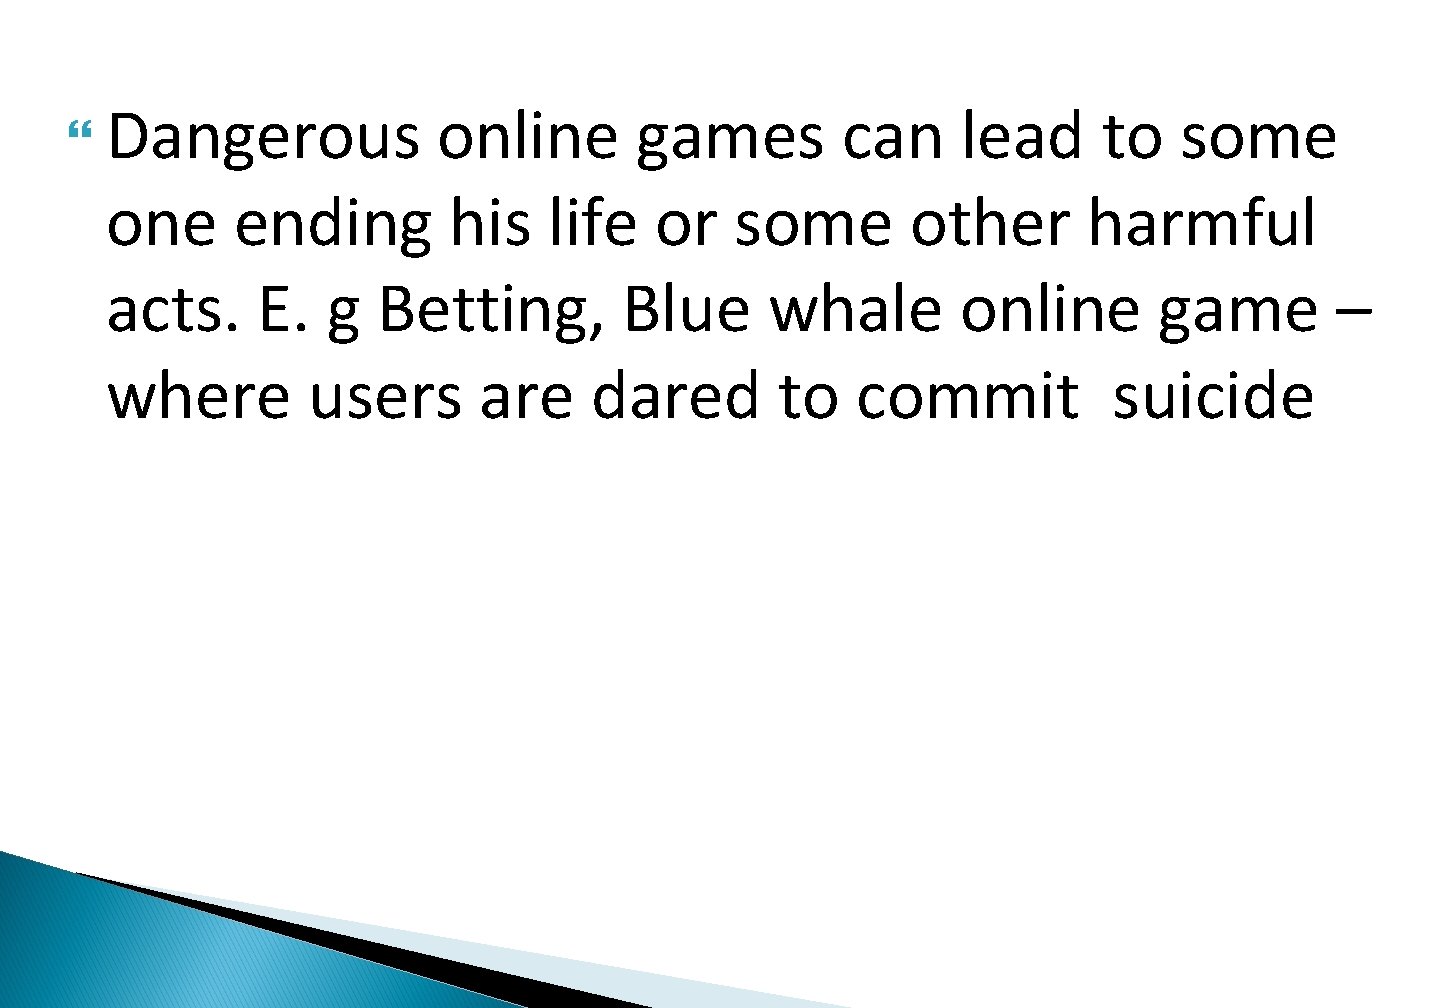  Dangerous online games can lead to some one ending his life or some